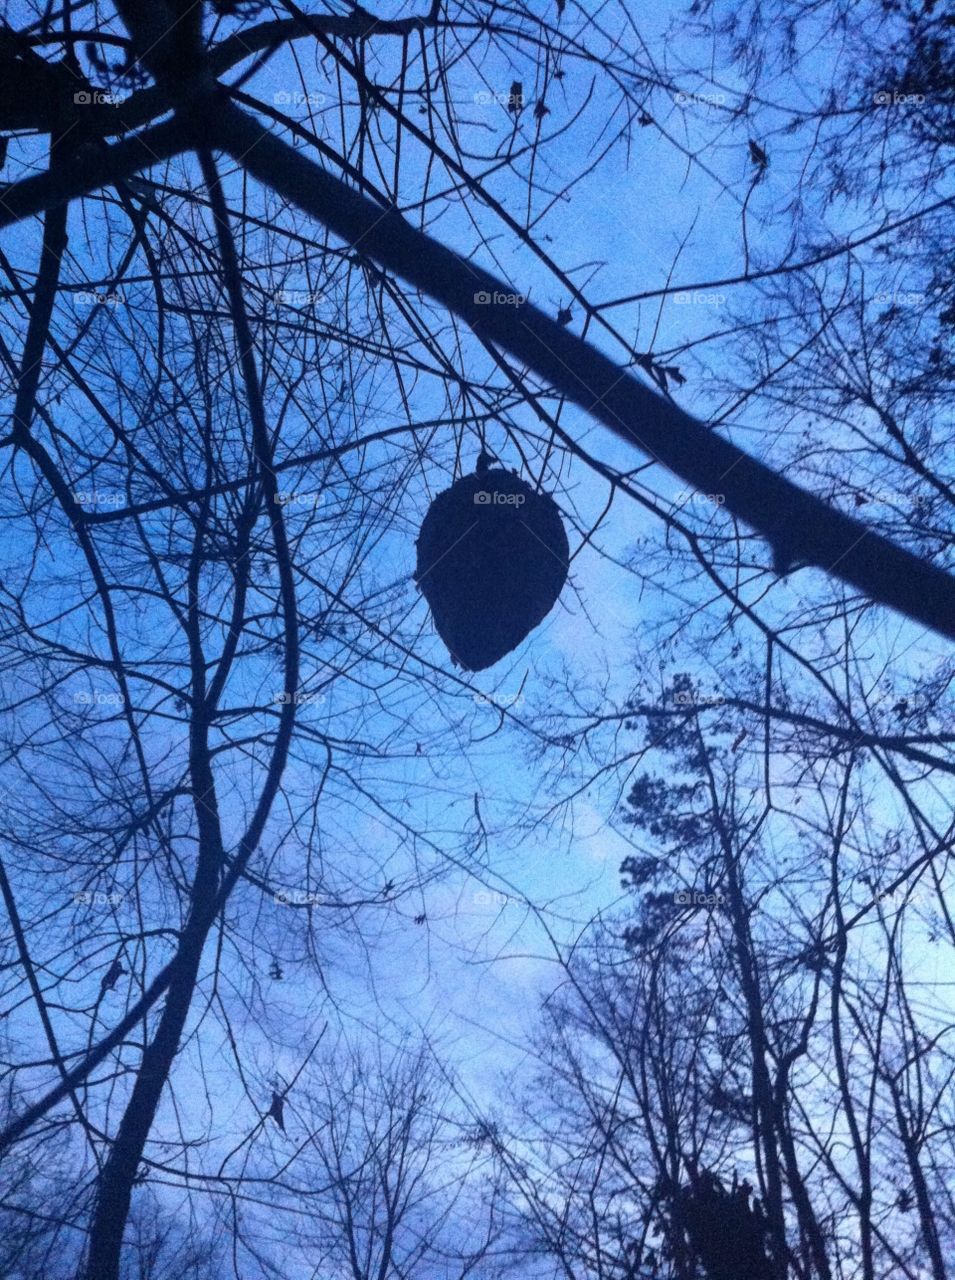 Hornets' Nest. A hornets' nest in the woods near my grandmother's house at twilight. 